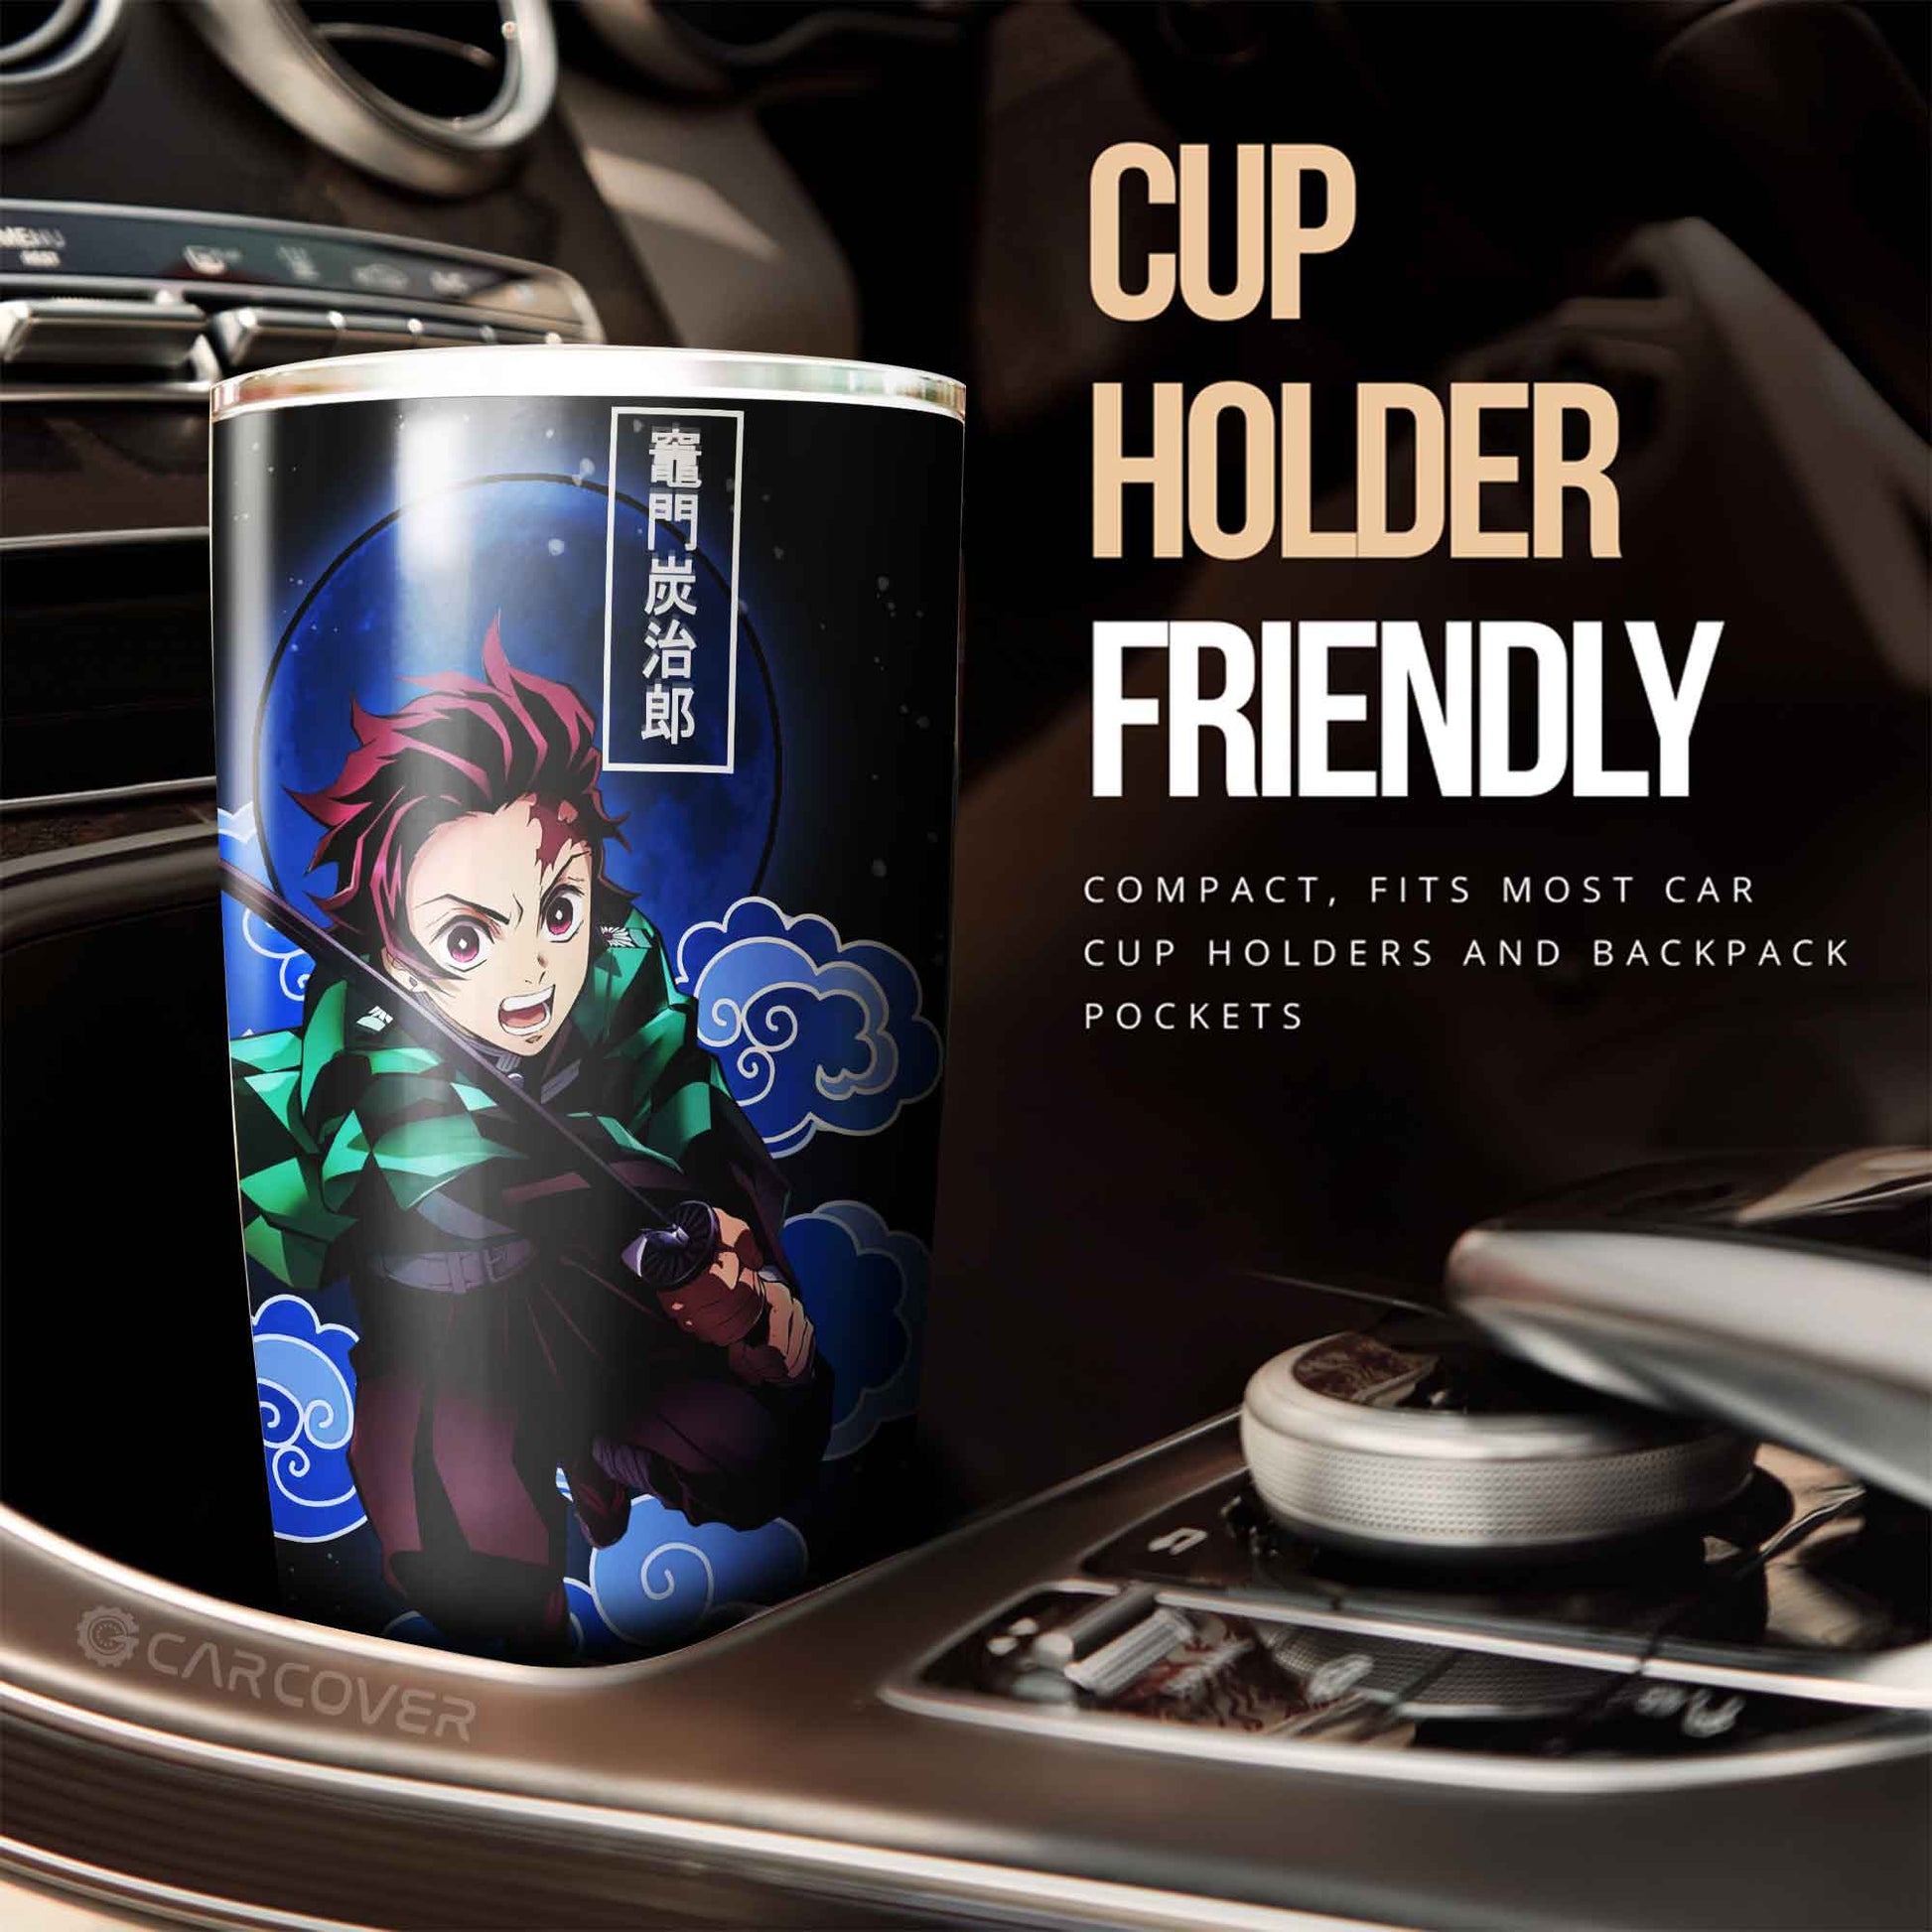 Tanjiro And Nezuko Tumbler Cup Custom Anime Demon Slayer Car Accessories Perfect Gift For Fan - Gearcarcover - 3